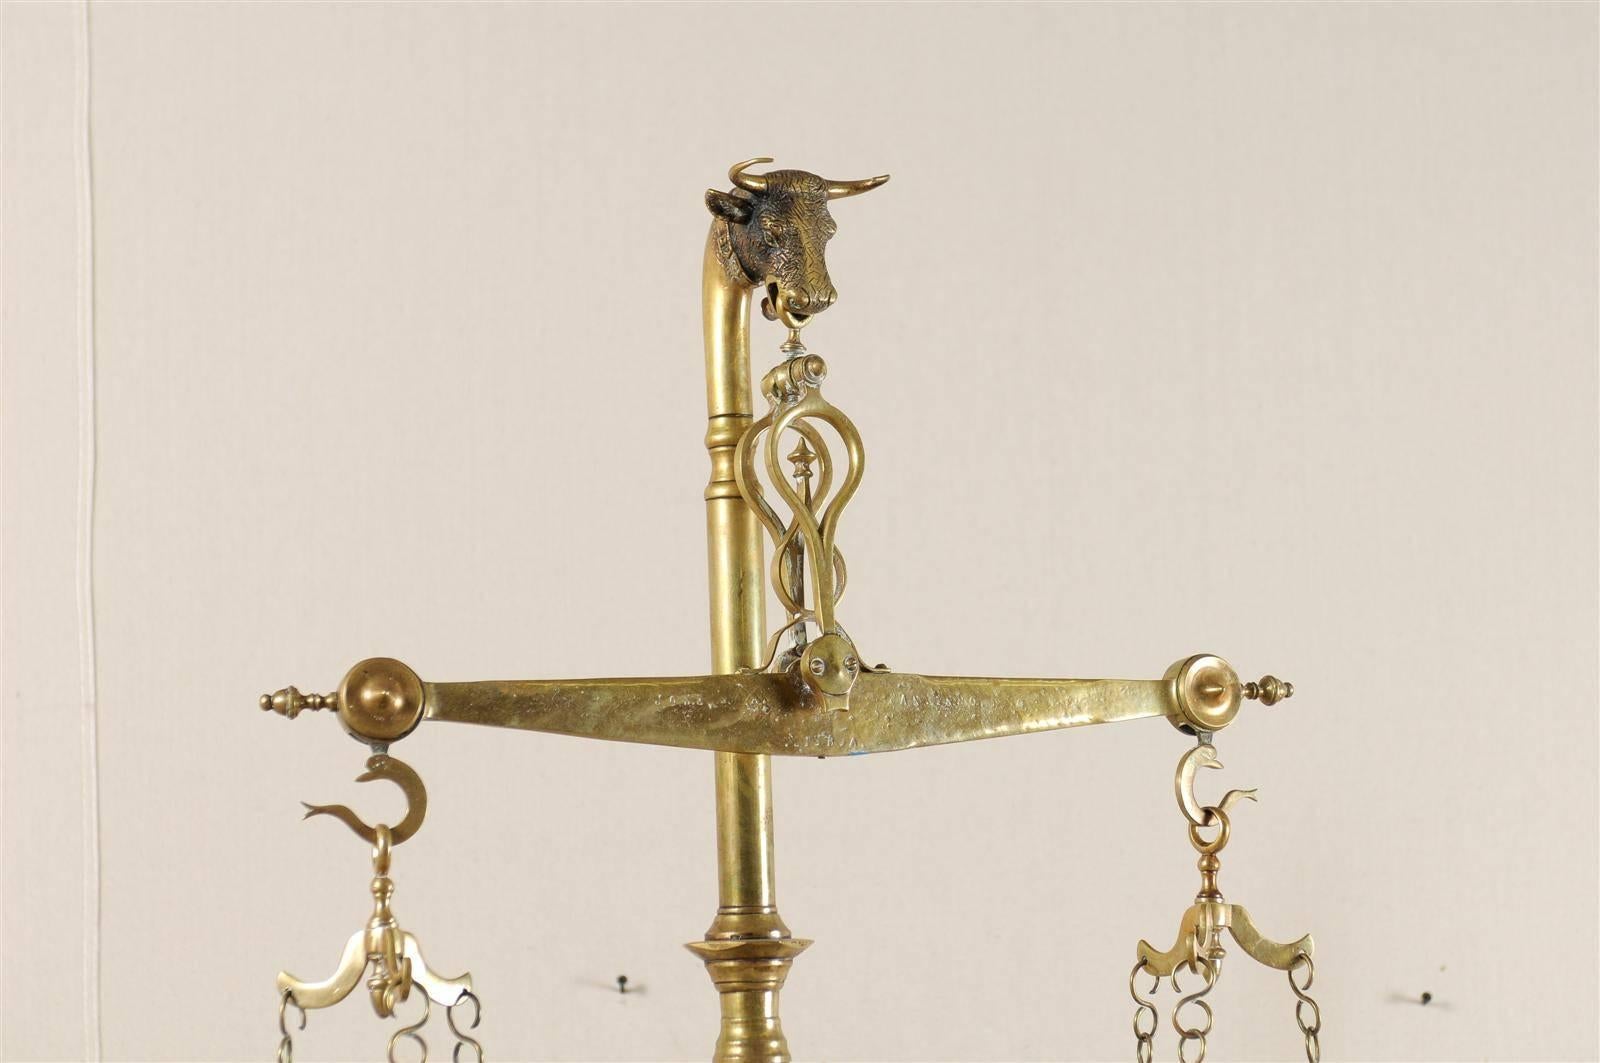 A Grand Sized 19th Century Dutch Brass Scale with Several Small Weights Included 3